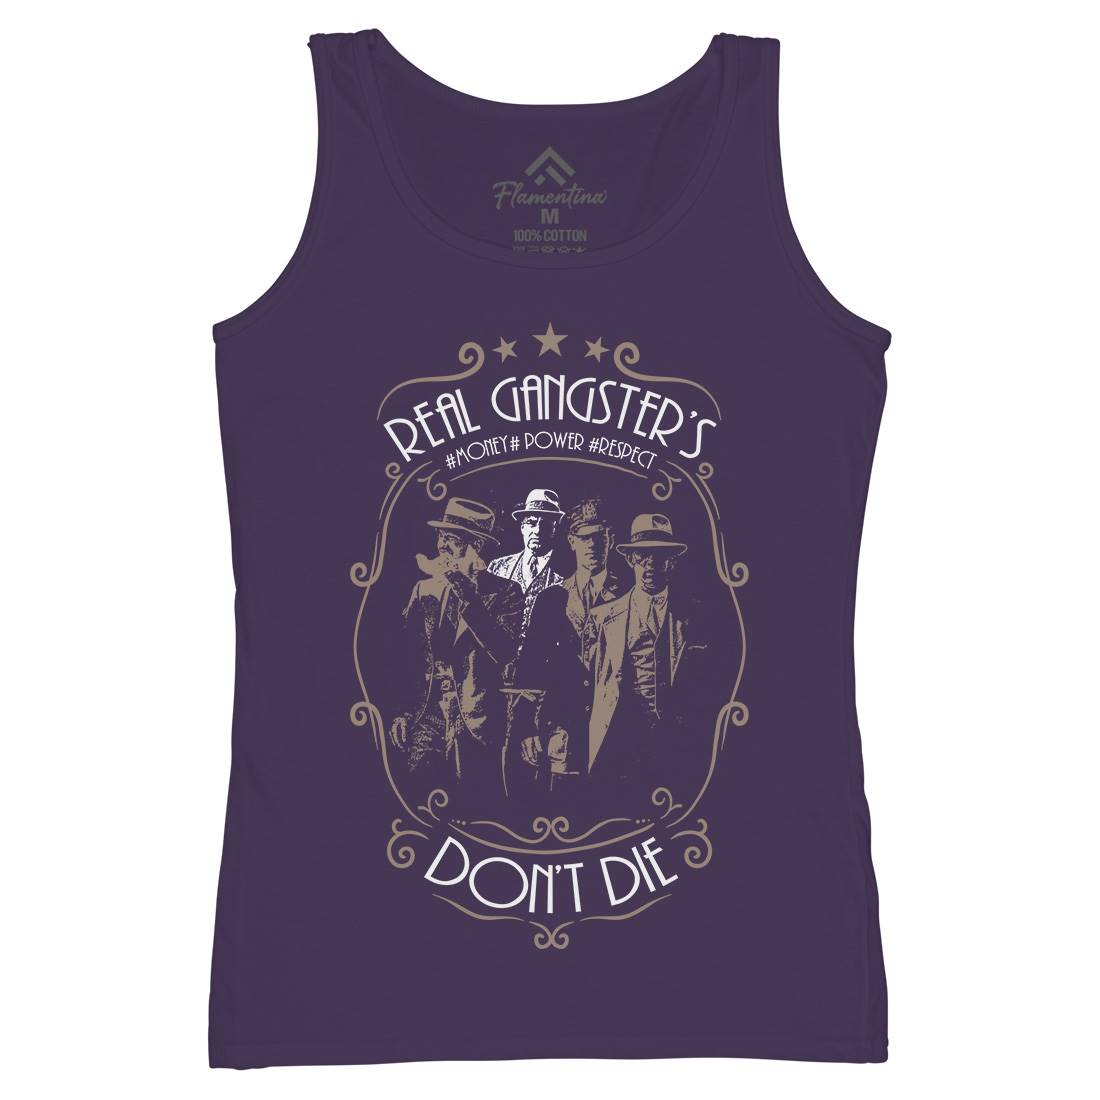 Real Gangster&#39;s Don&#39;t Die Womens Organic Tank Top Vest Retro C972